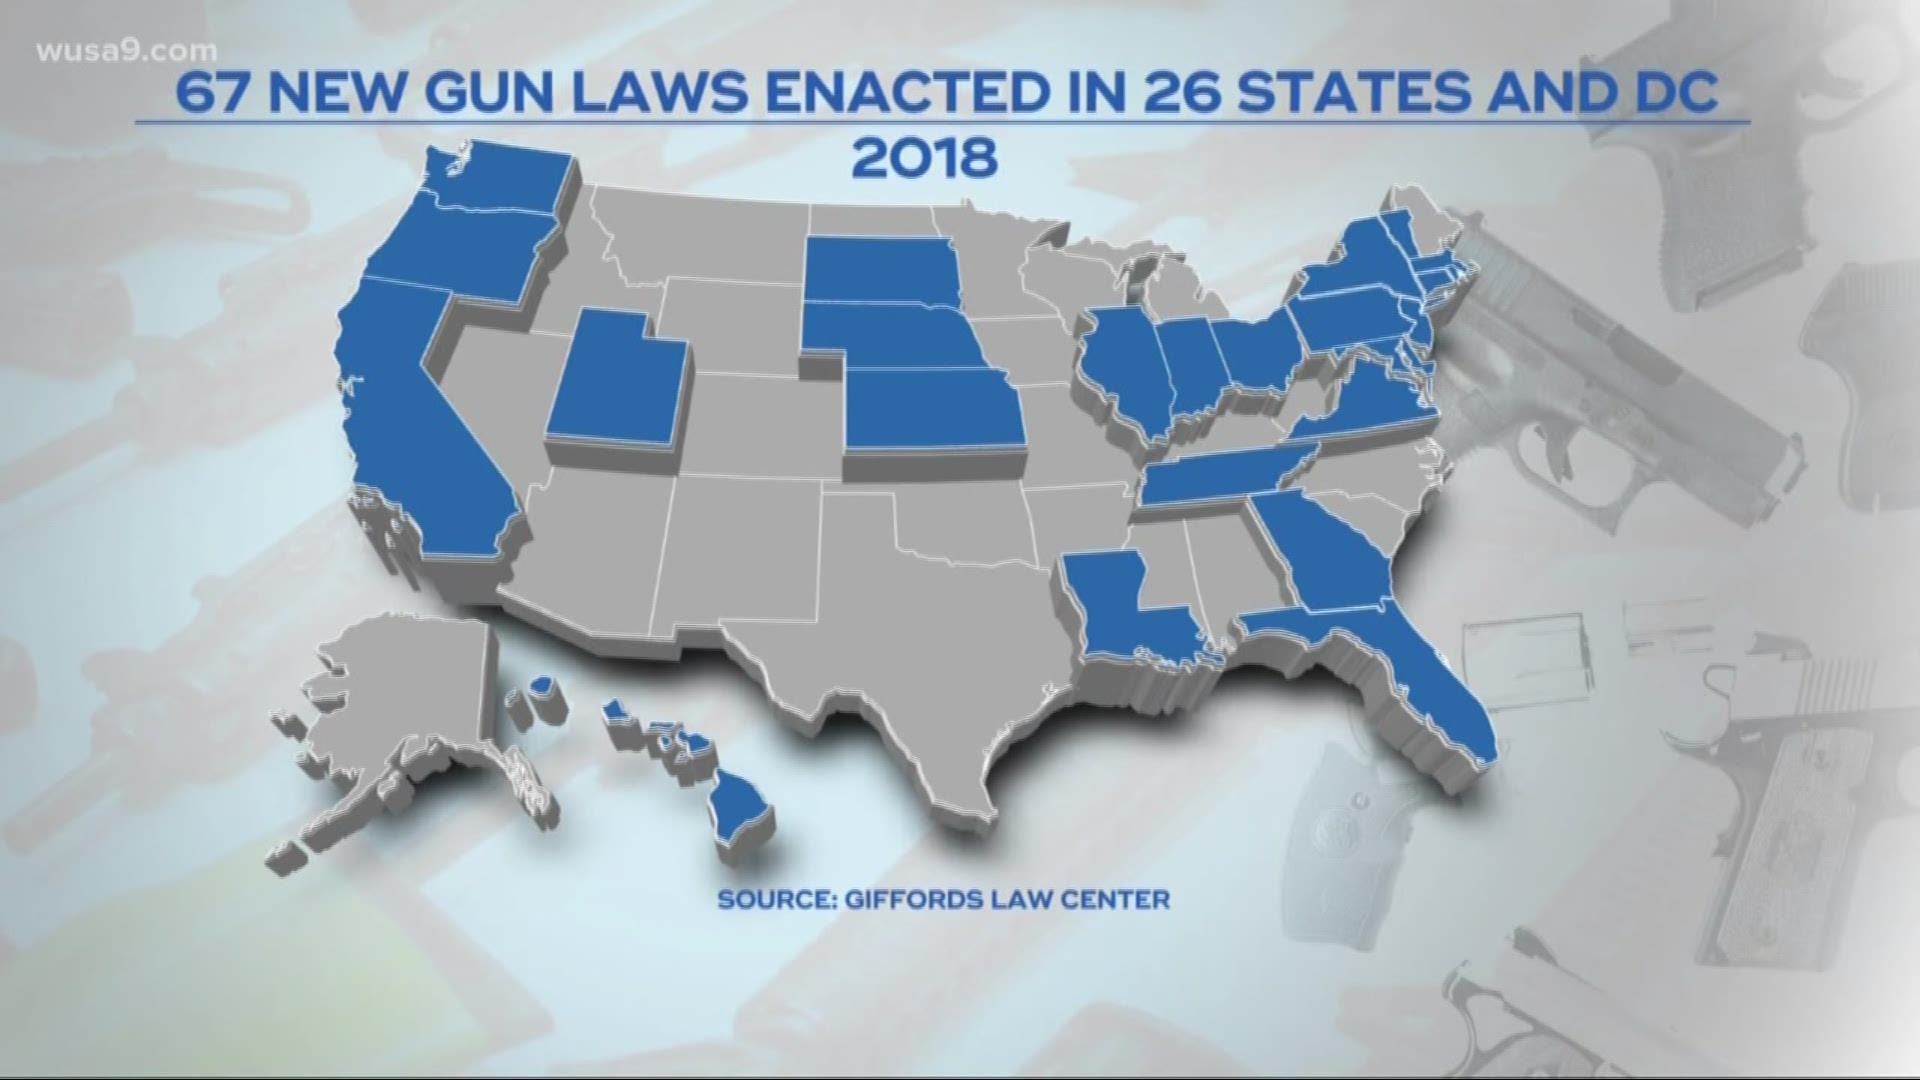 According to the Giffords Law Center, 26 states and the District put nearly 70 new gun laws in place last year